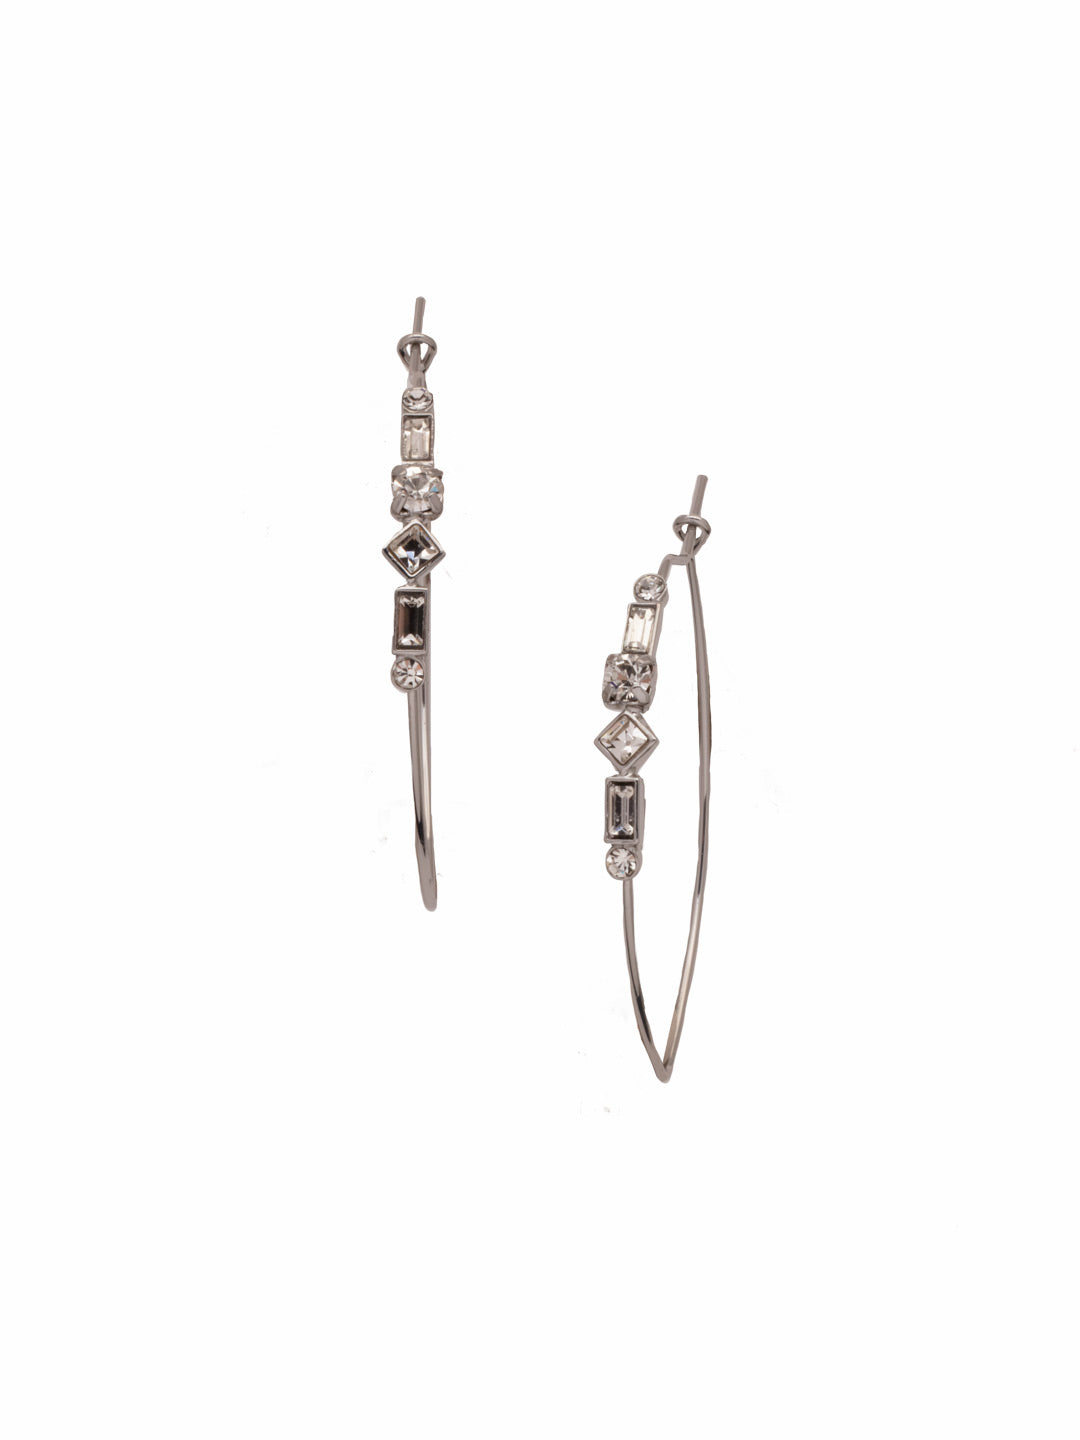 Regina Hoop Earrings - EET54PDCRY - <p>Take your hoop game up a notch with the Regina Hoop Earrings. The delicate loop of metal is affixed with a mix of sparkling crystals in fun shapes including baquette, diamond and round pieces. From Sorrelli's Crystal collection in our Palladium finish.</p>